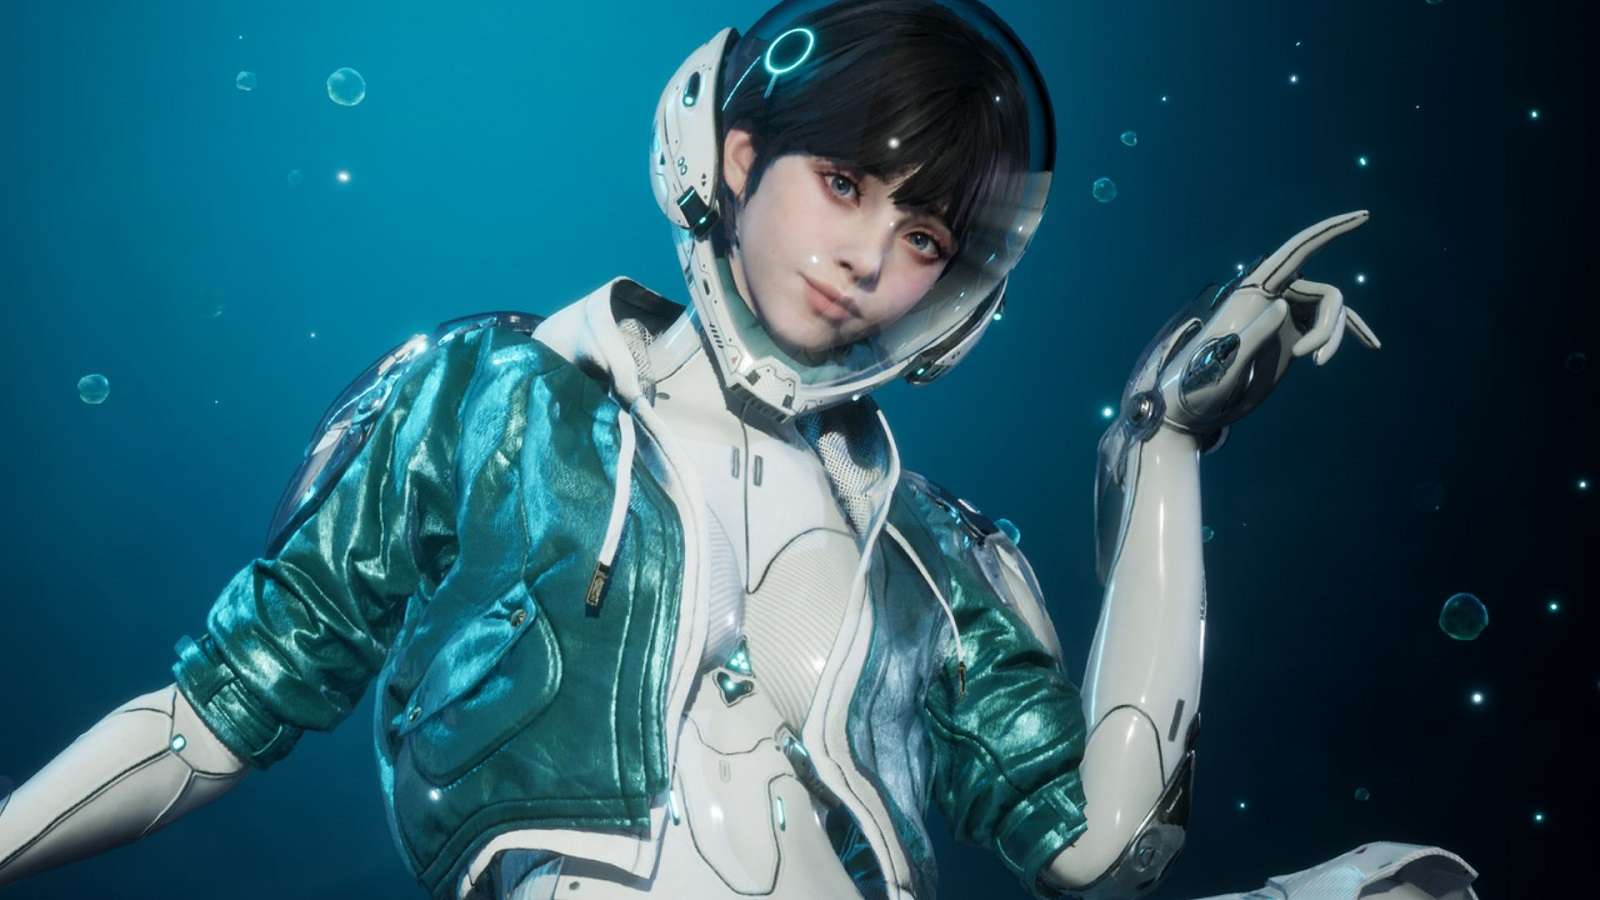 The First Descendant character in a space suit